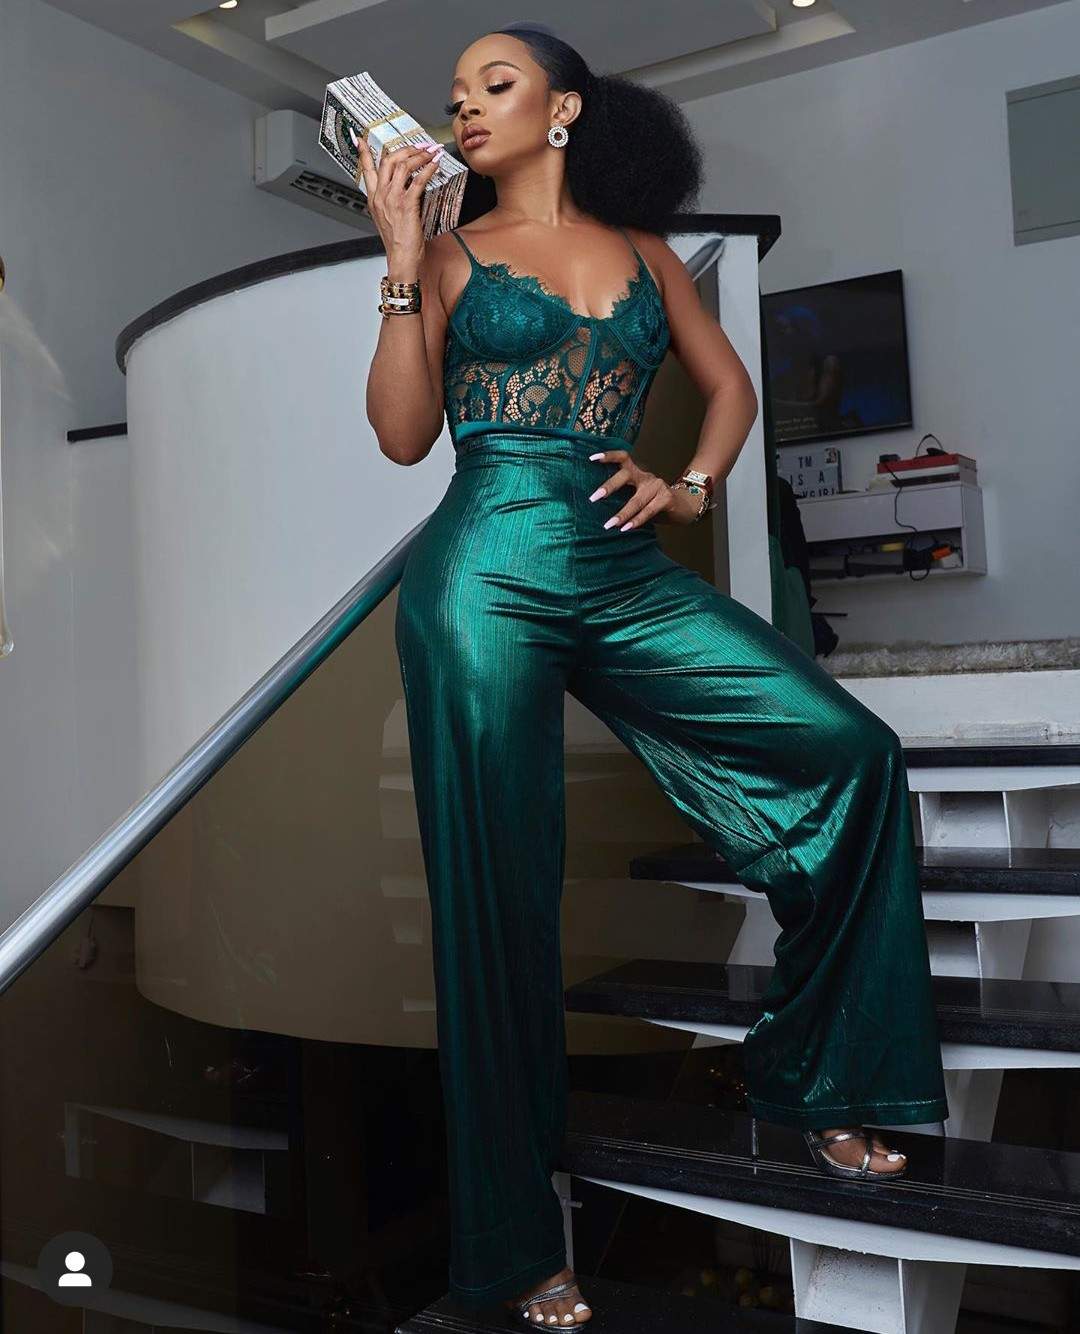 'If you cheat on me and think I will be ashamed, you haven't met me' - Toke Makinwa writes